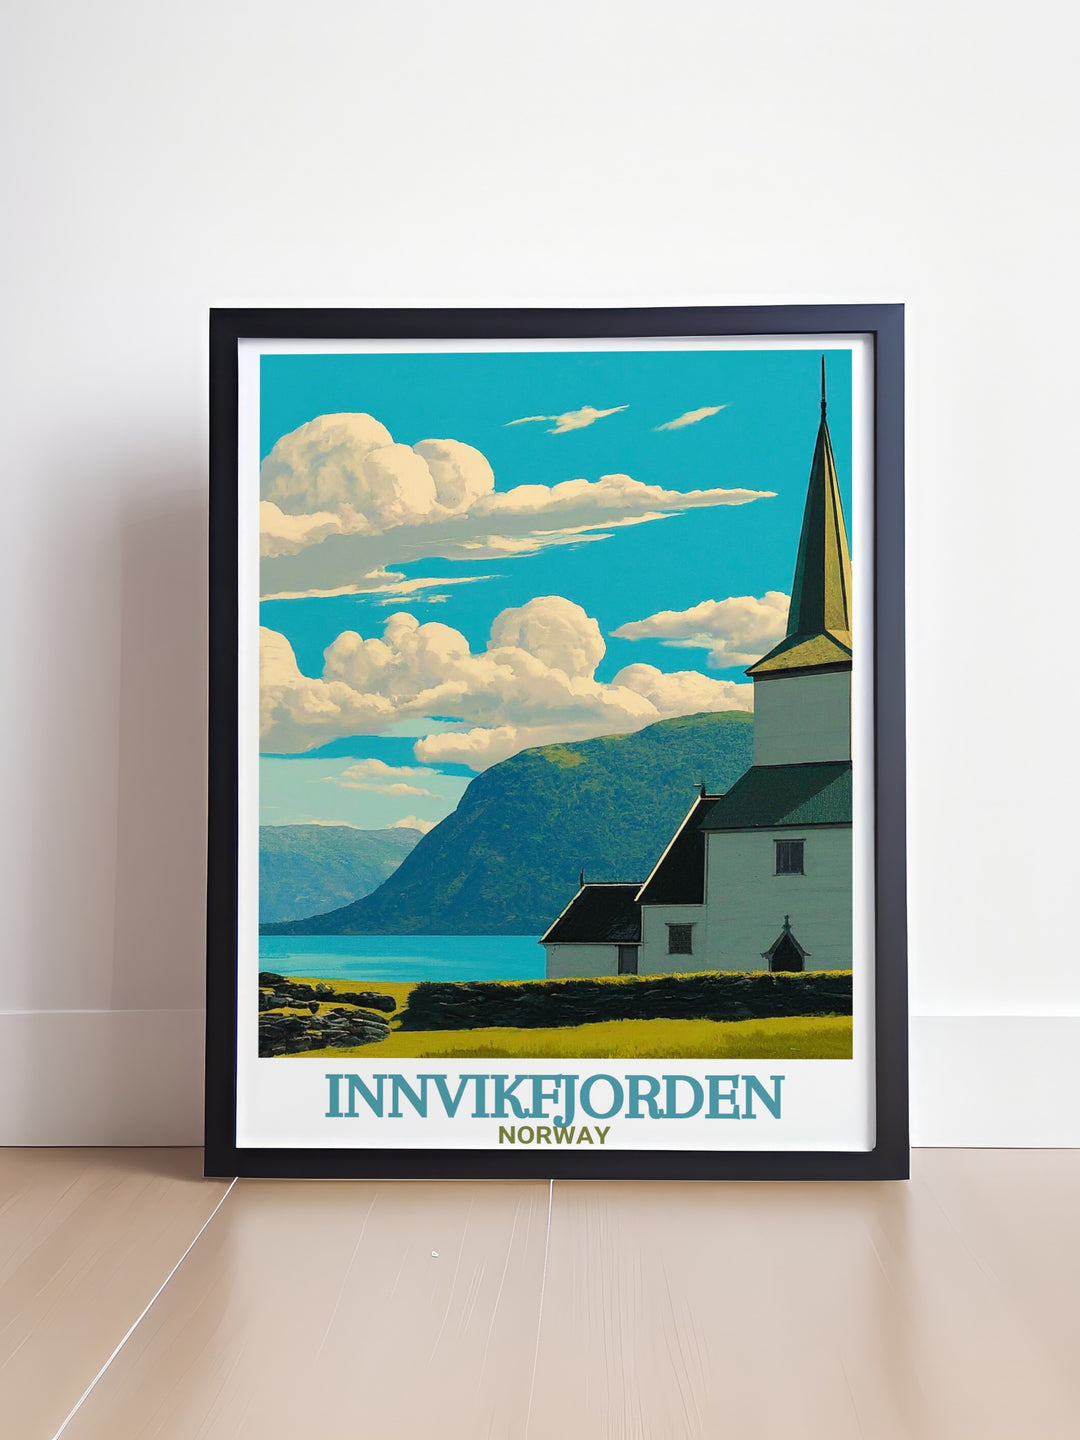 Stunning Innvik Church artwork capturing the peaceful fjord and scenic beauty of Norway nature ideal for home decor or gifts